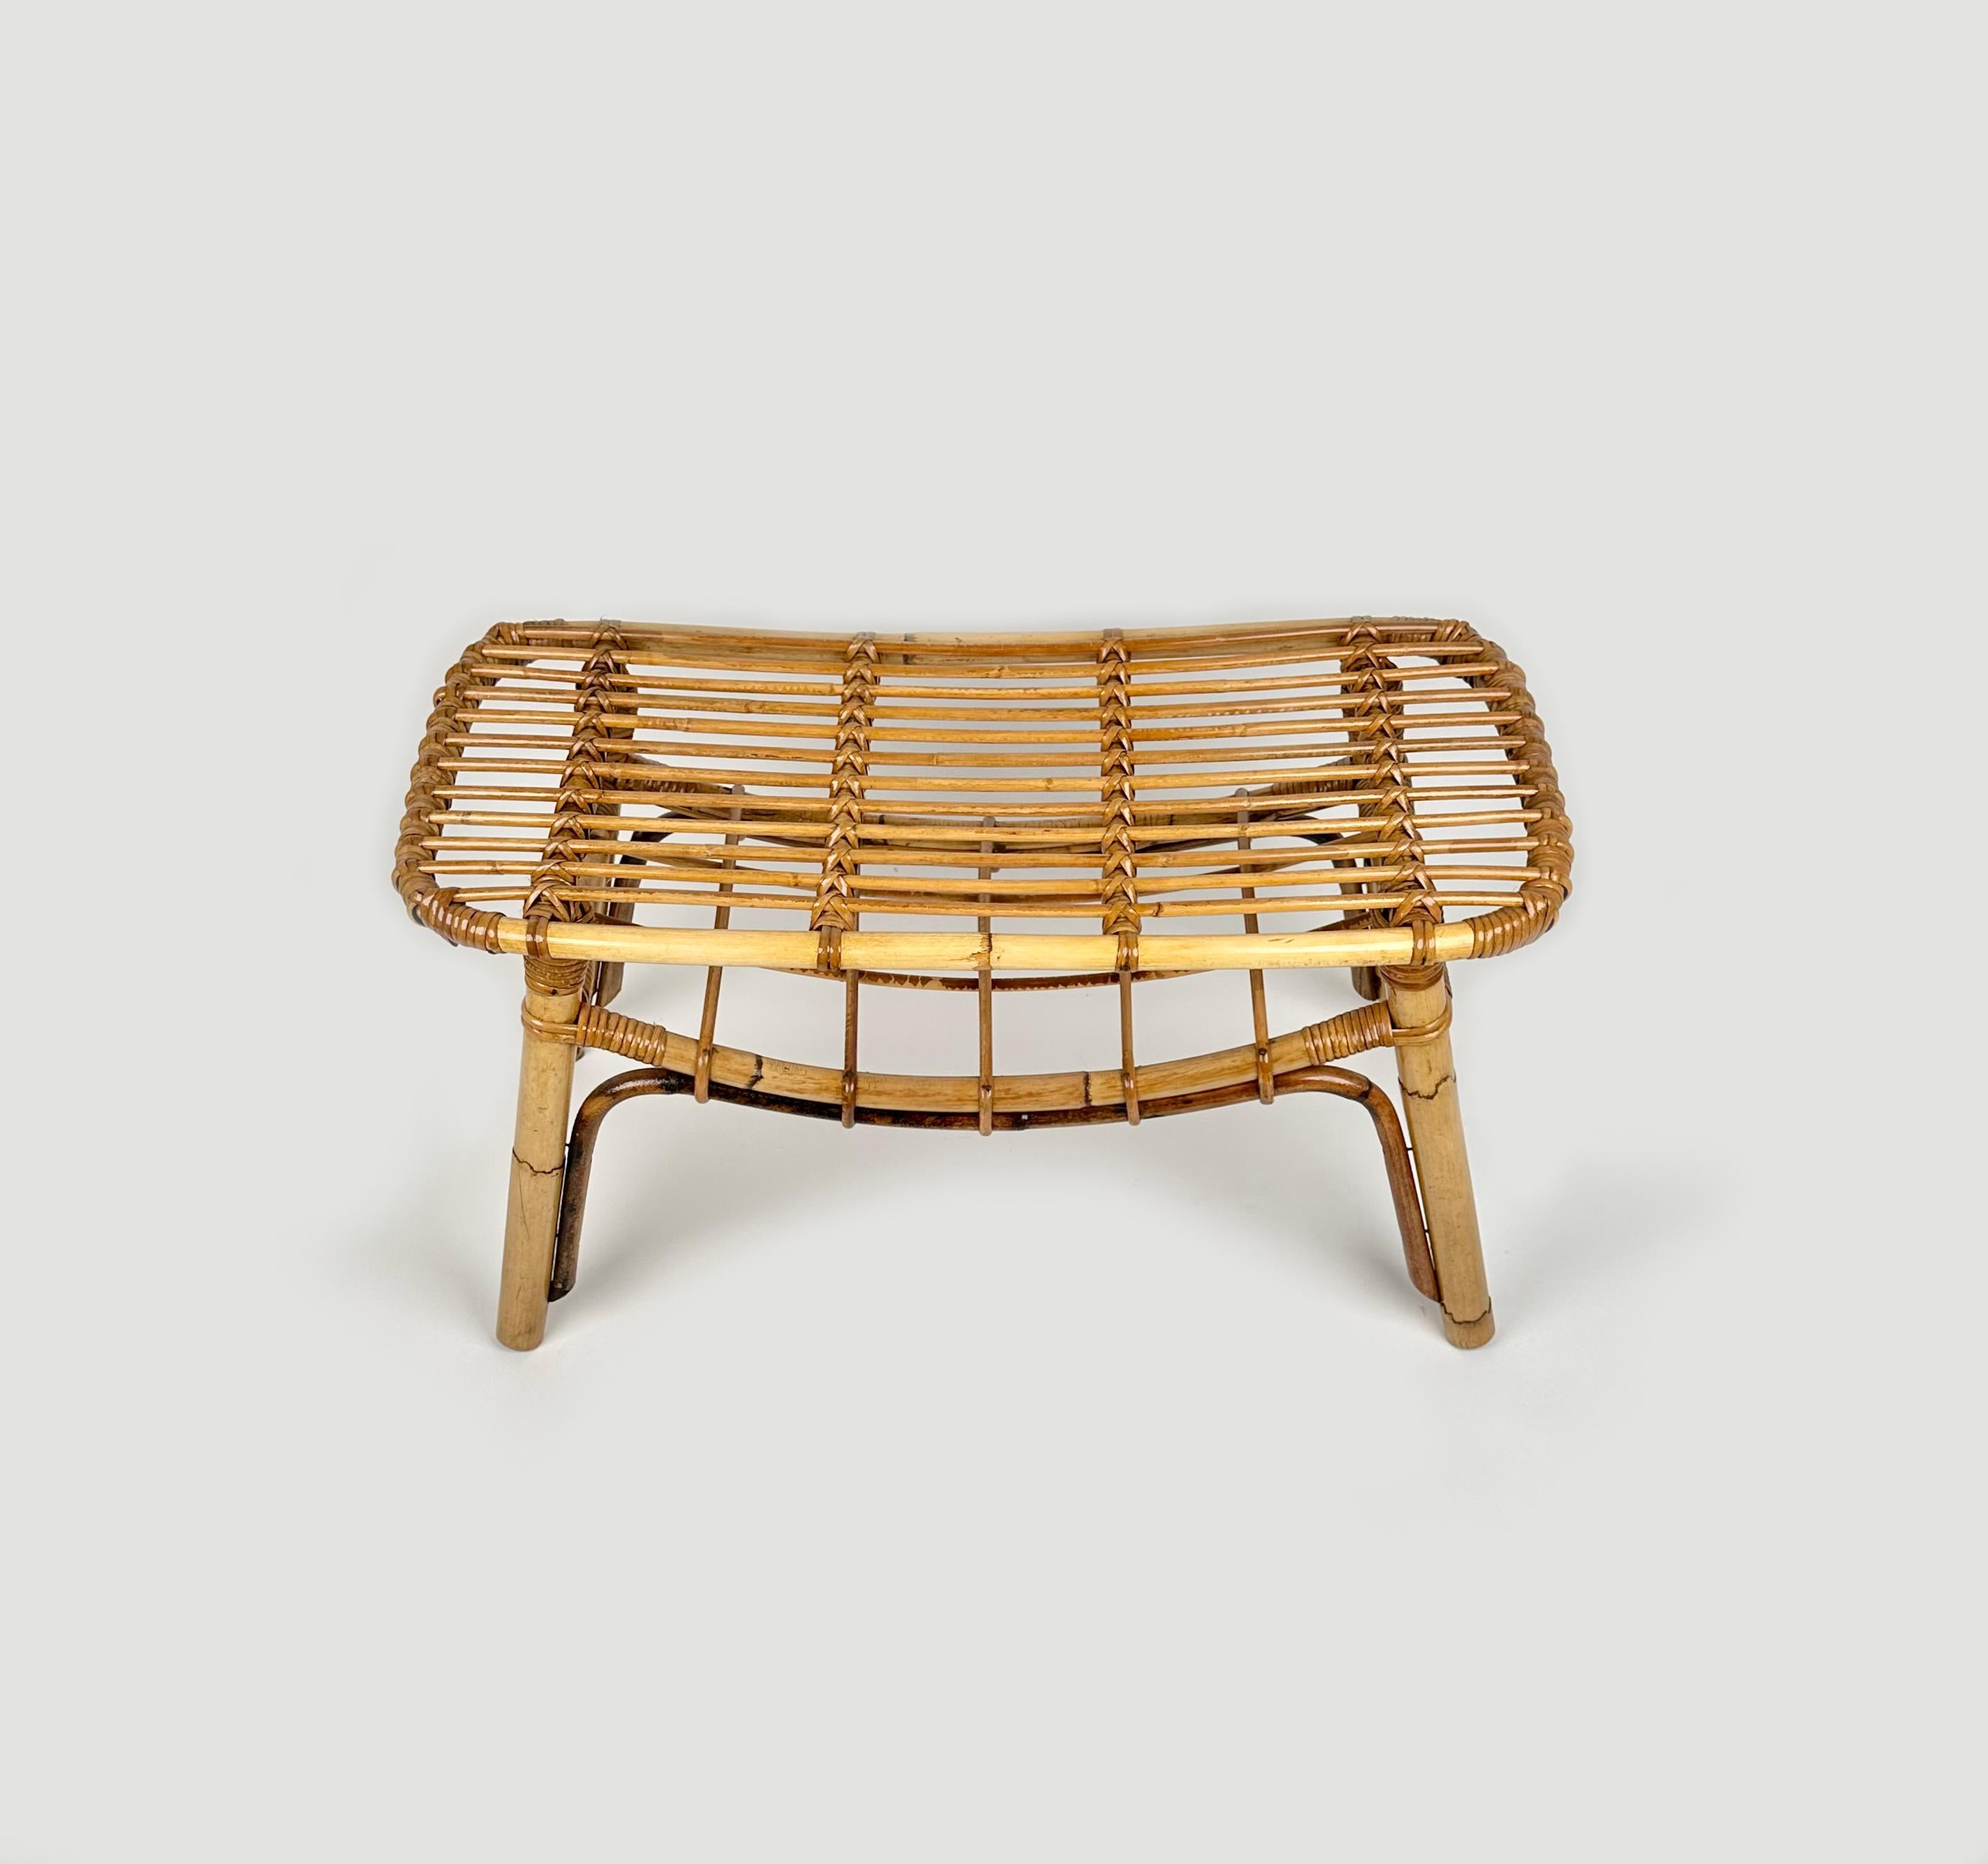 Bamboo & Rattan French Riviera Coffee Table with Magazine Rack, Italy 1960s For Sale 1